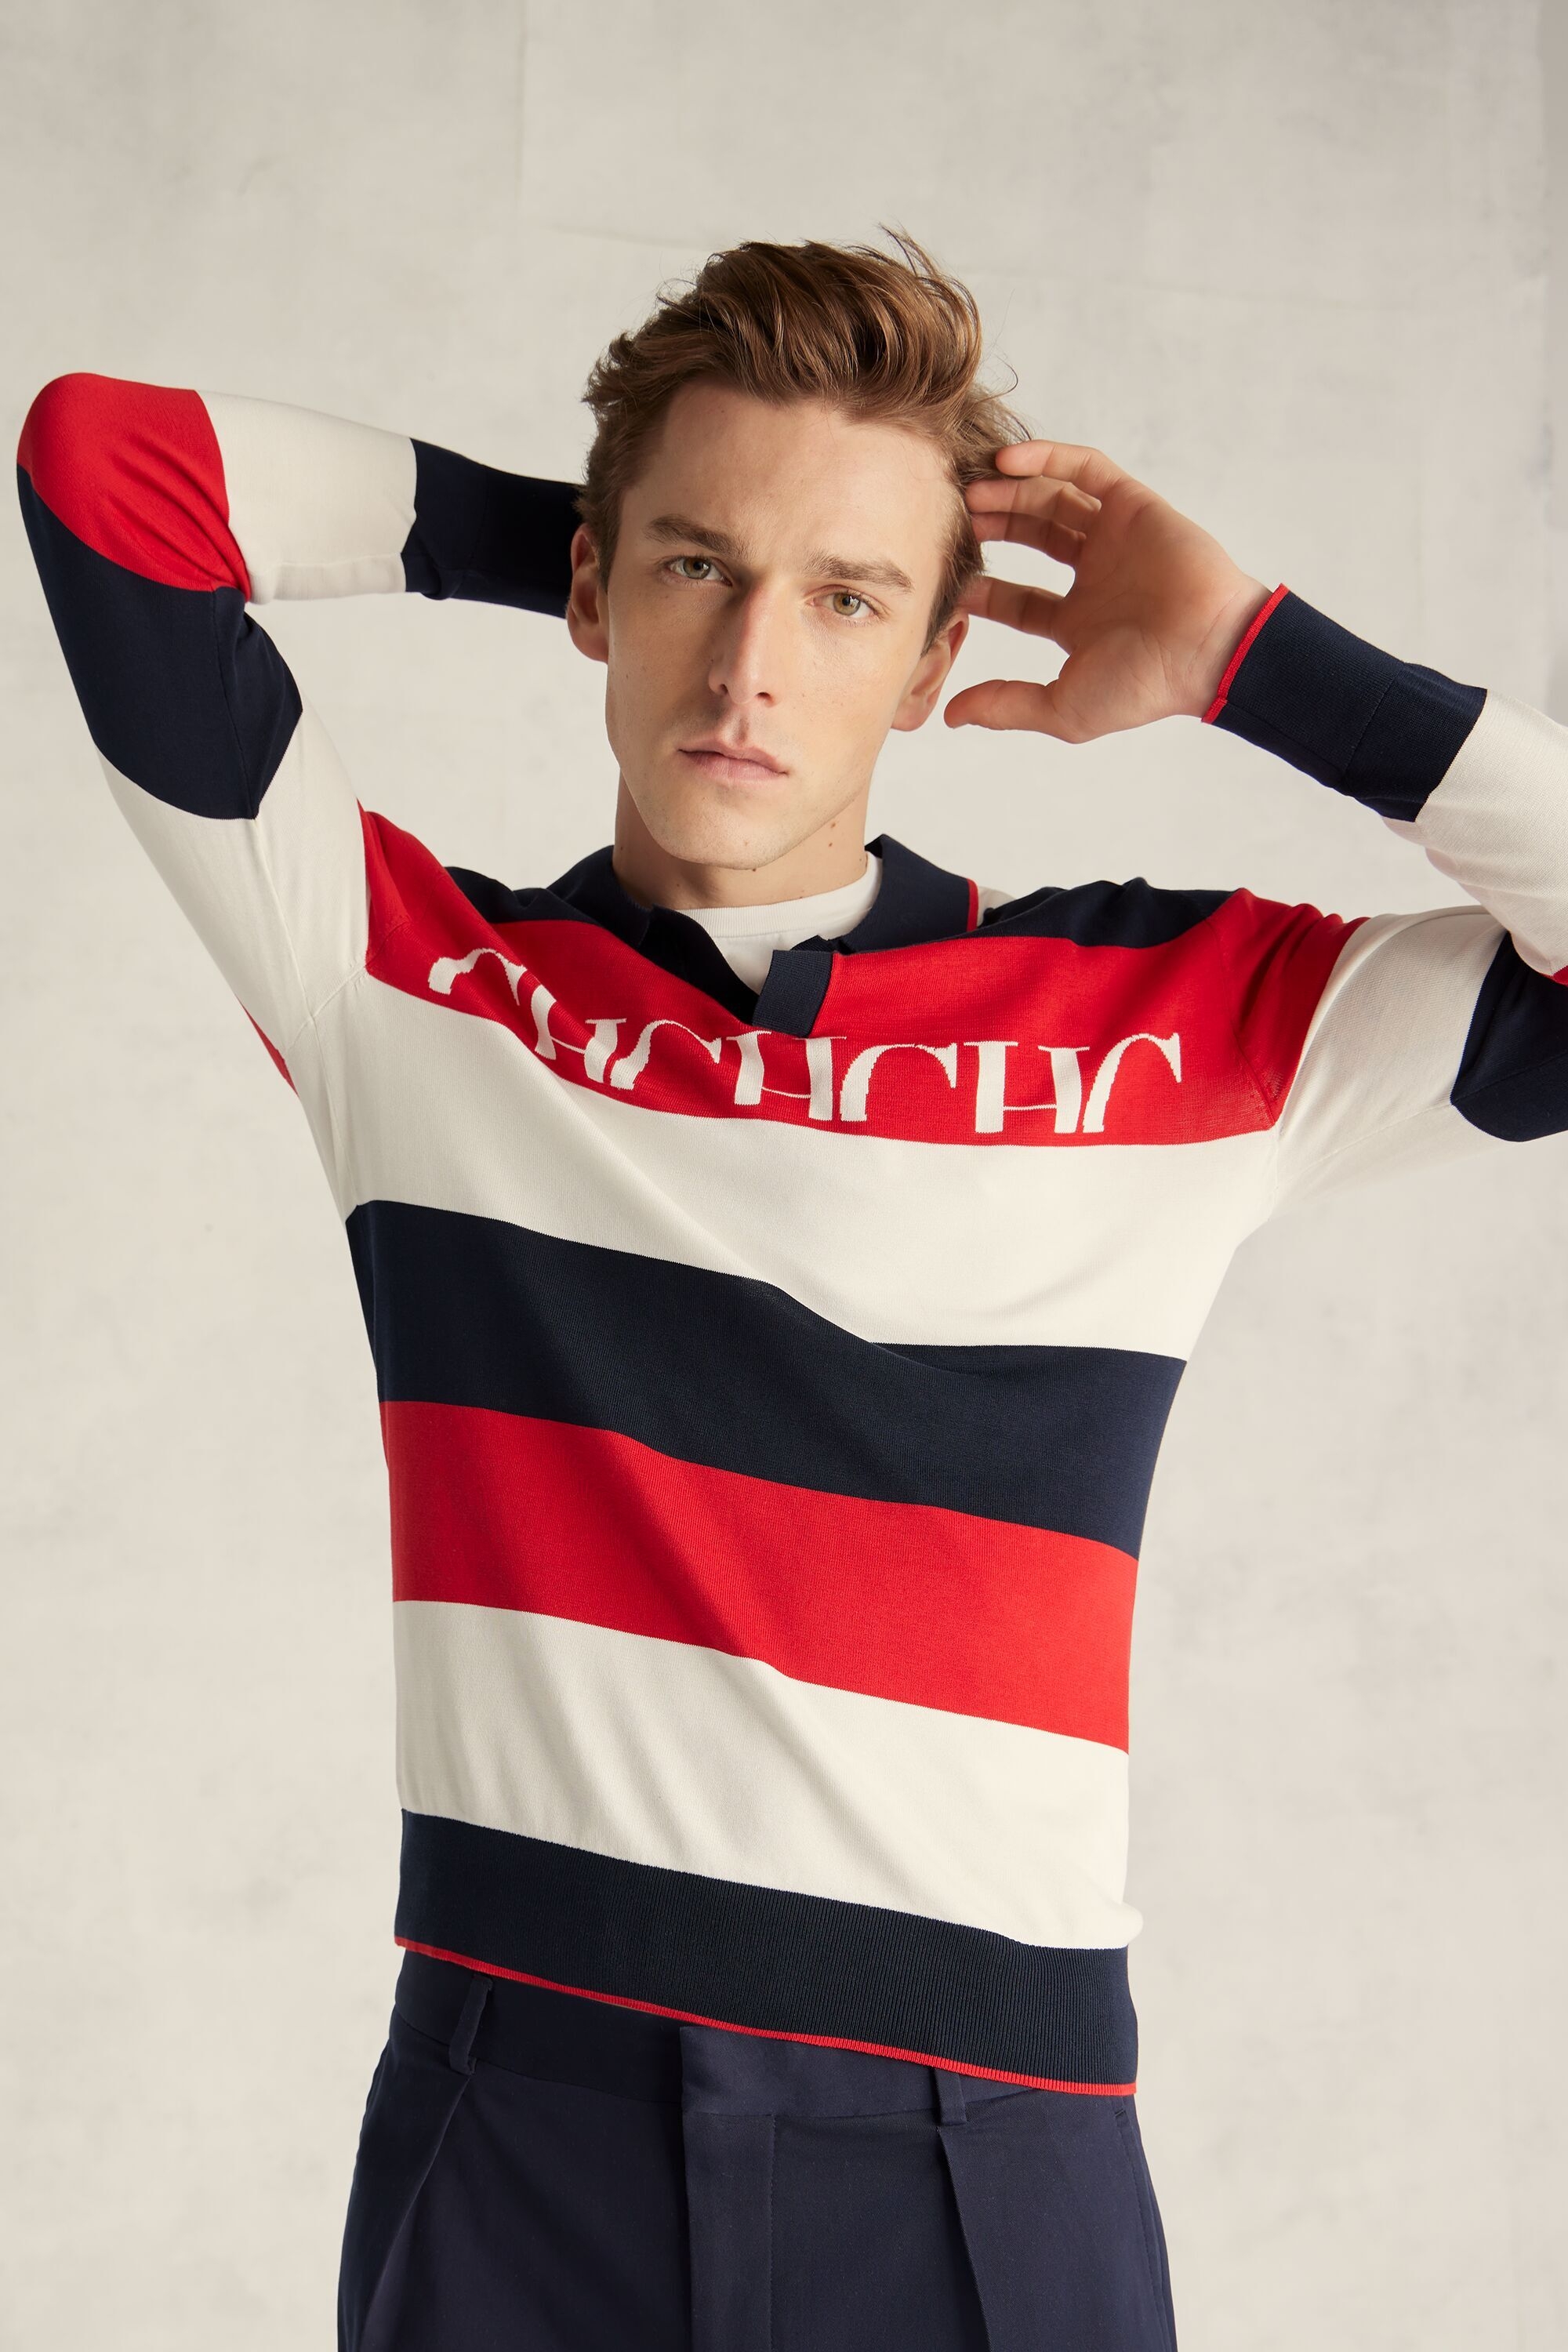 CH striped gassed cotton sweater